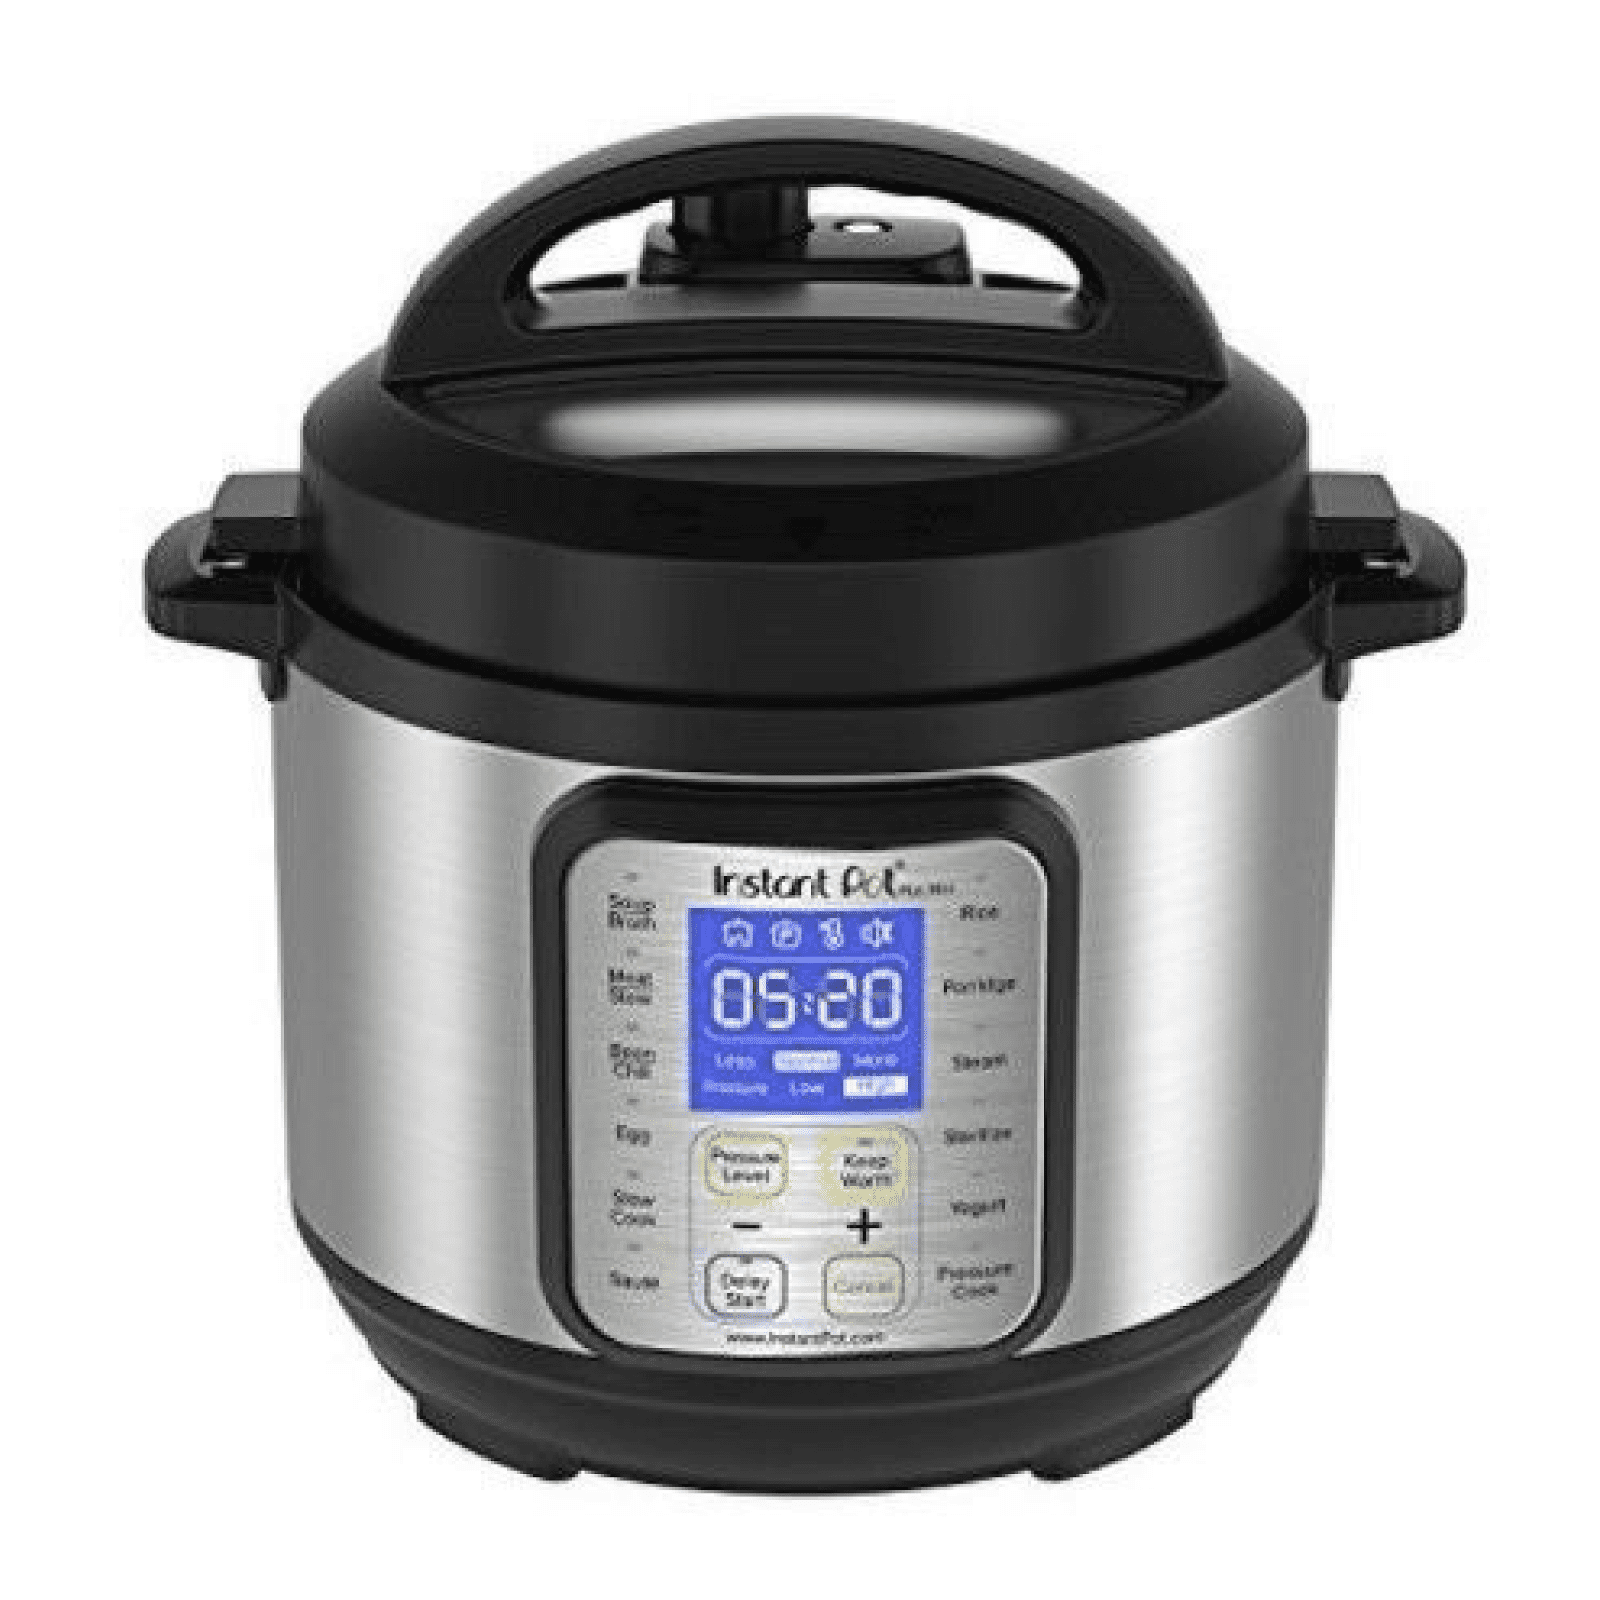 Slow Cook Instant Pot LUX 60 V3 Qt 6-in-1 Muti-Use Programmable Pressure Cooker 